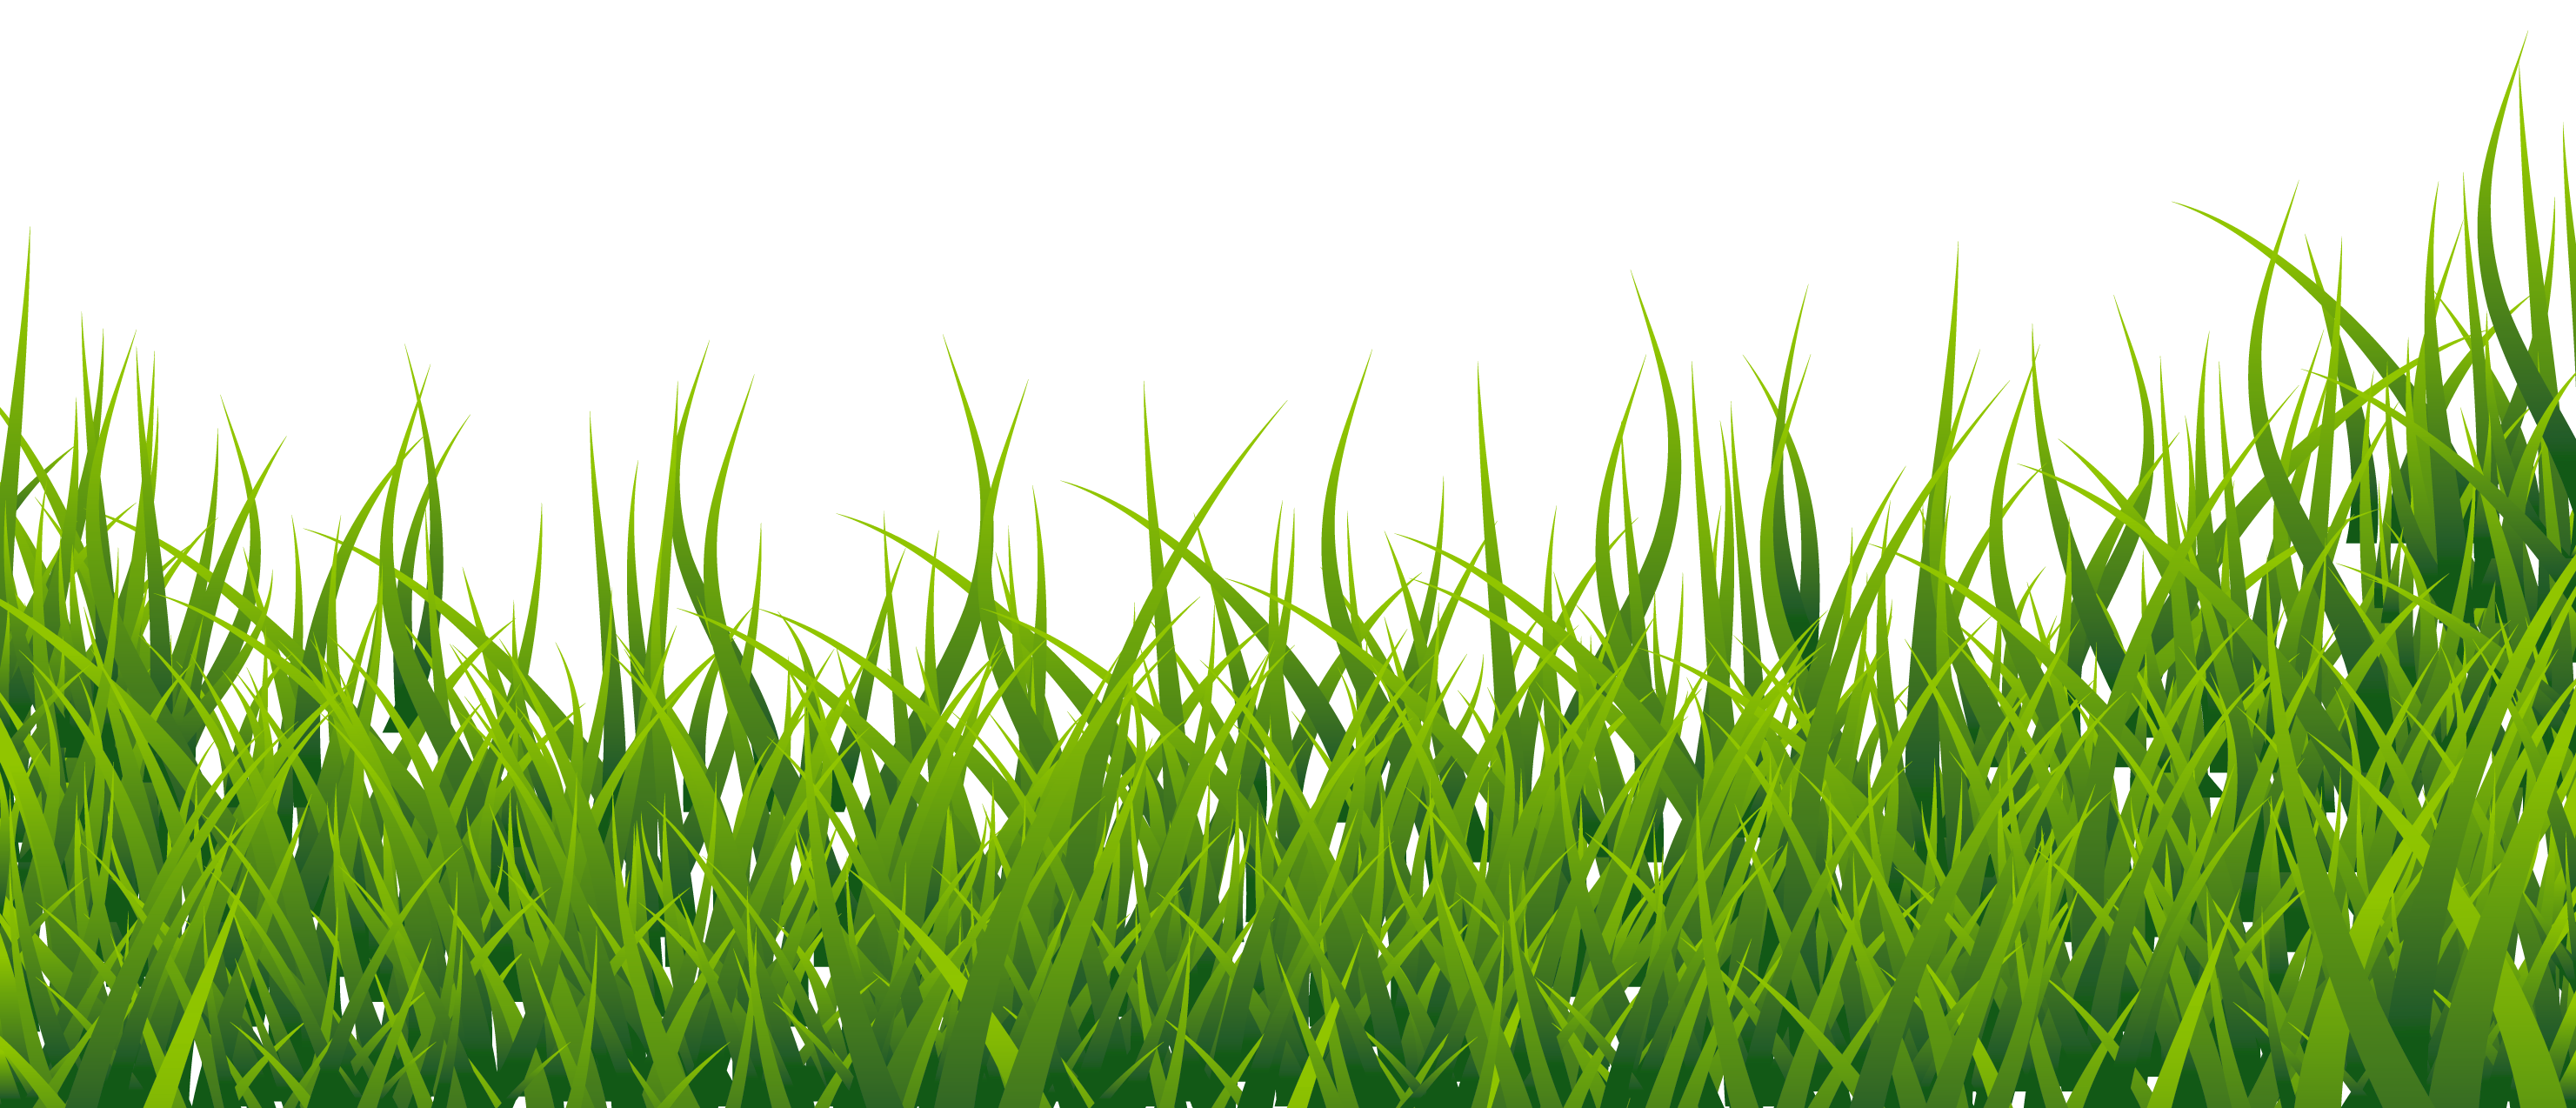 Grass and flowers clip art free clipart image clipartcow